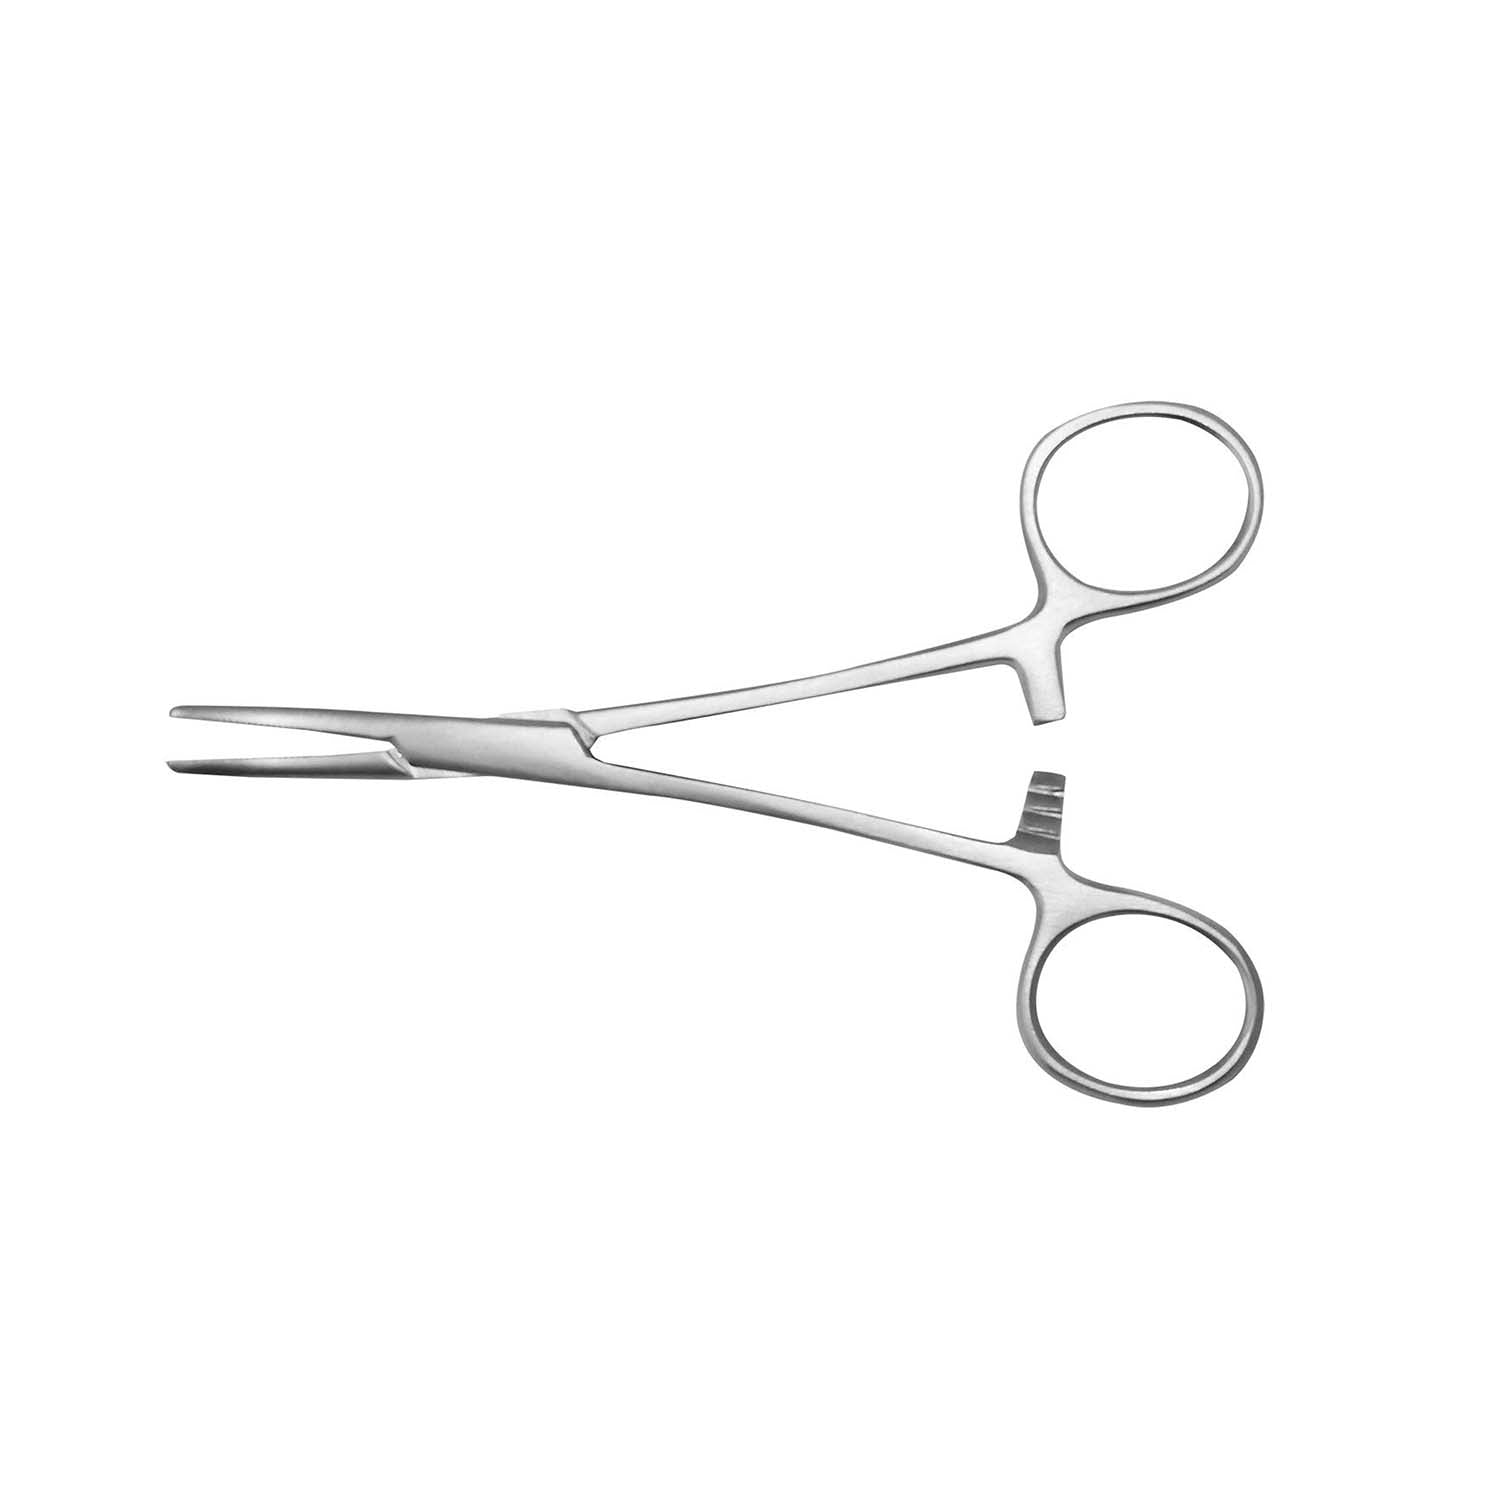 Instramed Dunhill Artery Forceps | Curved | 12.5cm | Single | Short Expiry Date